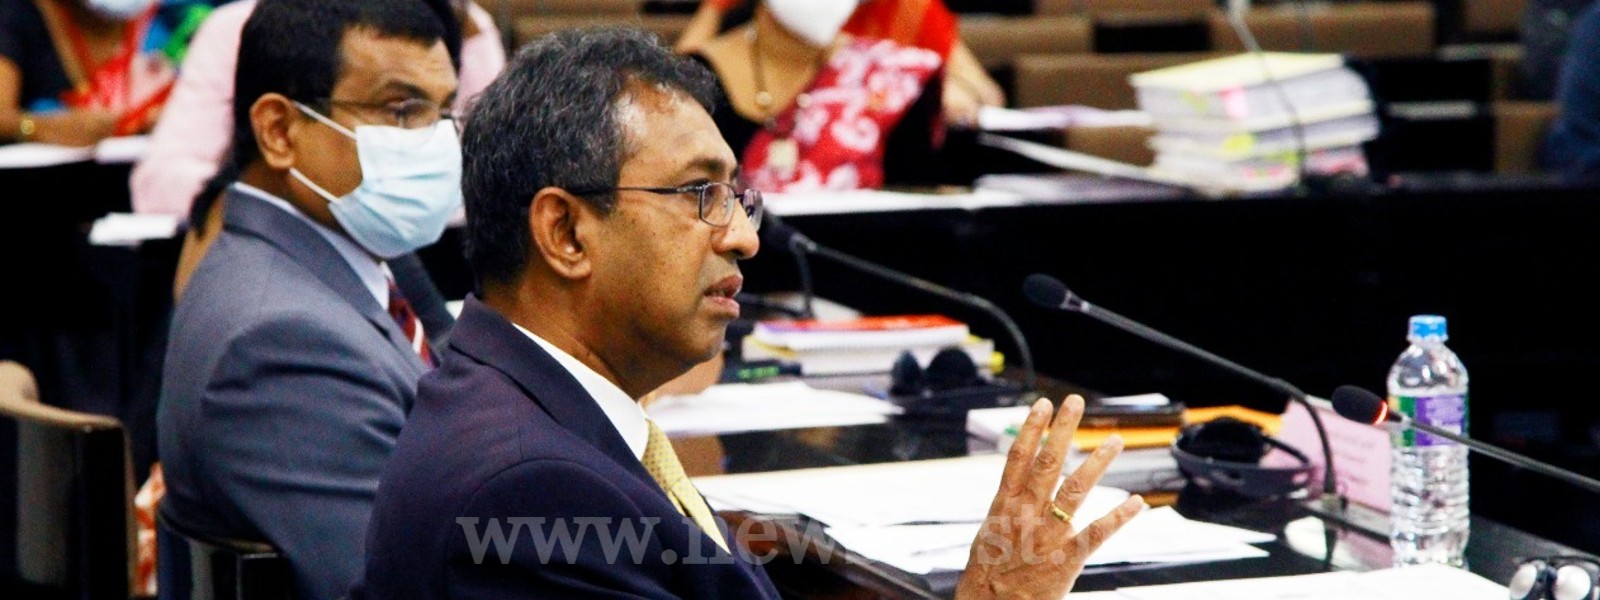 Harsha chairs Committee on Public Finance